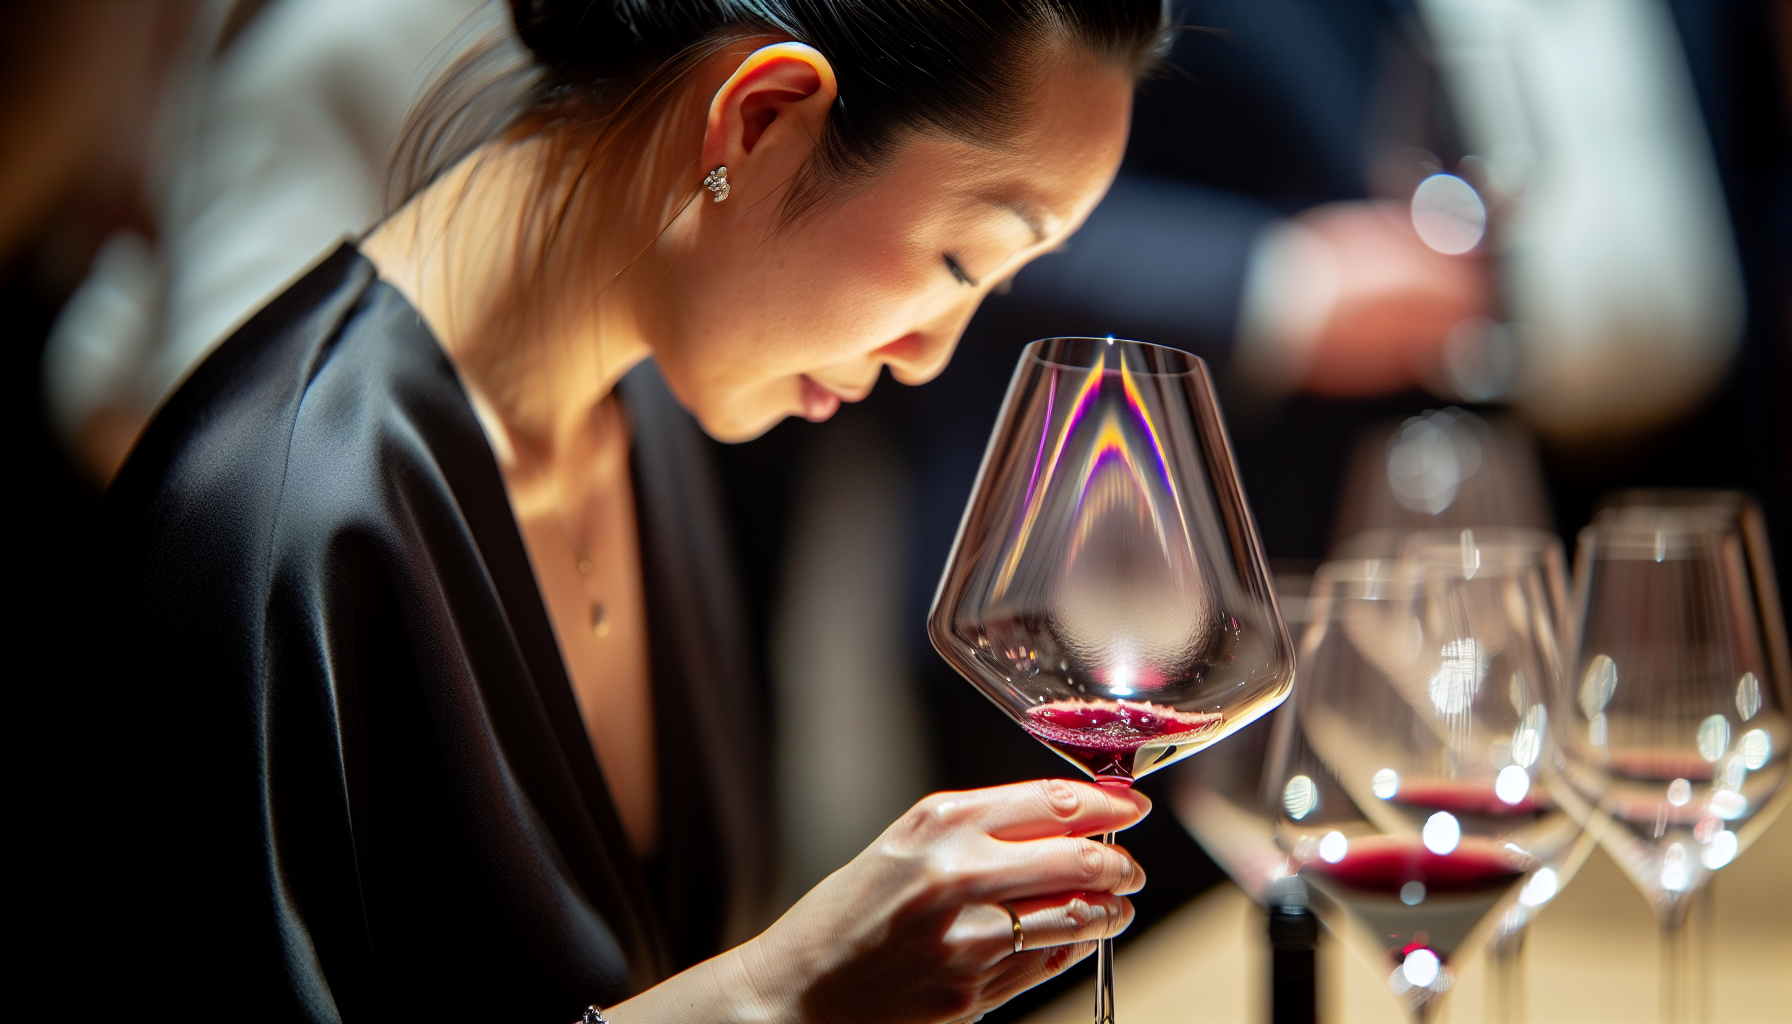 A person swirling a glass of red wine during a tasting event